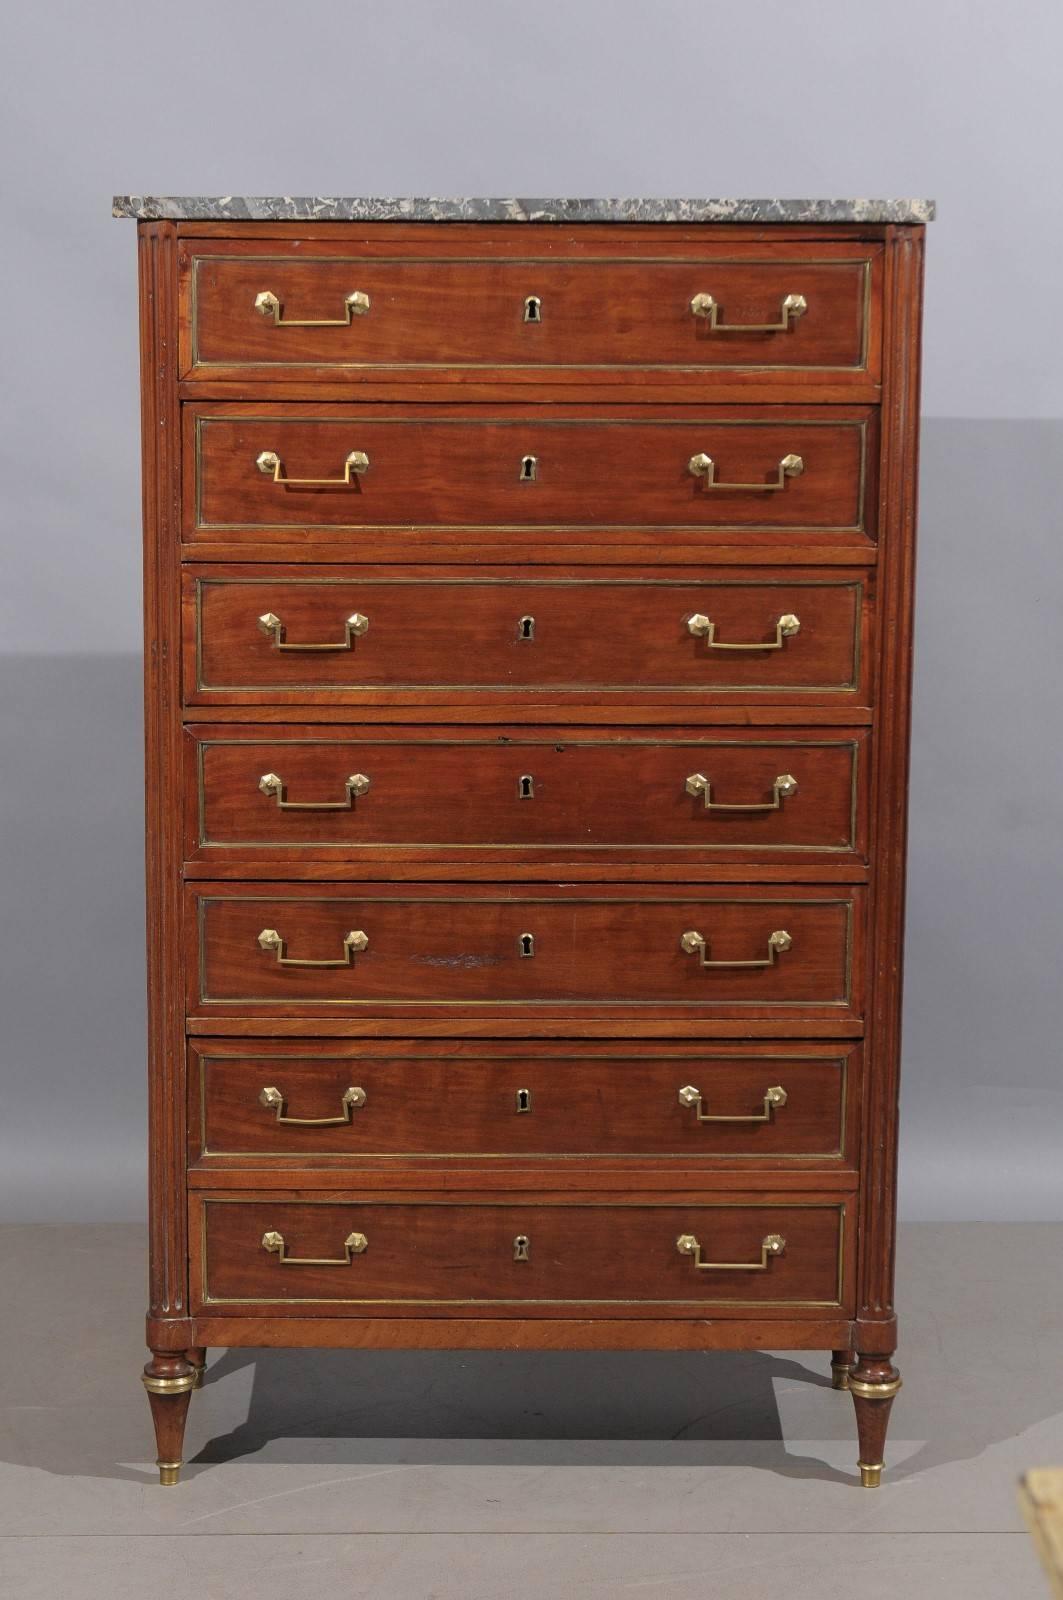 18th century French Louis XVI period six-drawer semanier in mahogany with grey marble top and turned legs. There are five (5) standard drawers and one (1) deeper or double drawer on the bottom. Brass inlay in drawers and brass mounts on feet.